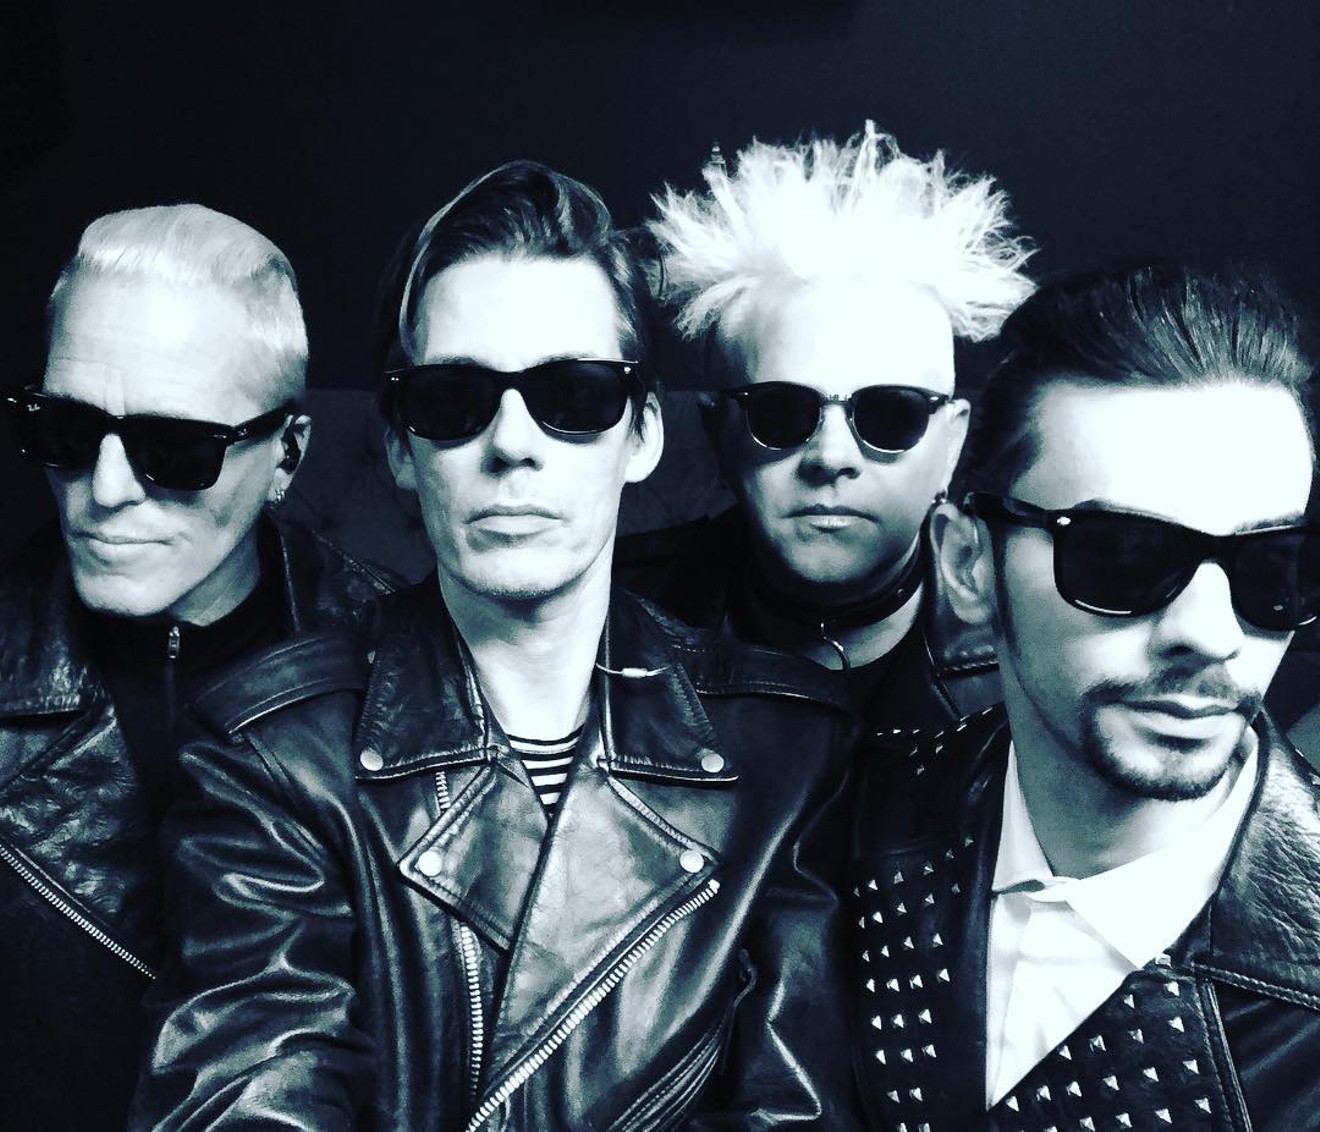 Strangelove—The Depeche Mode Experience plays the Venue on Saturday, September 17.